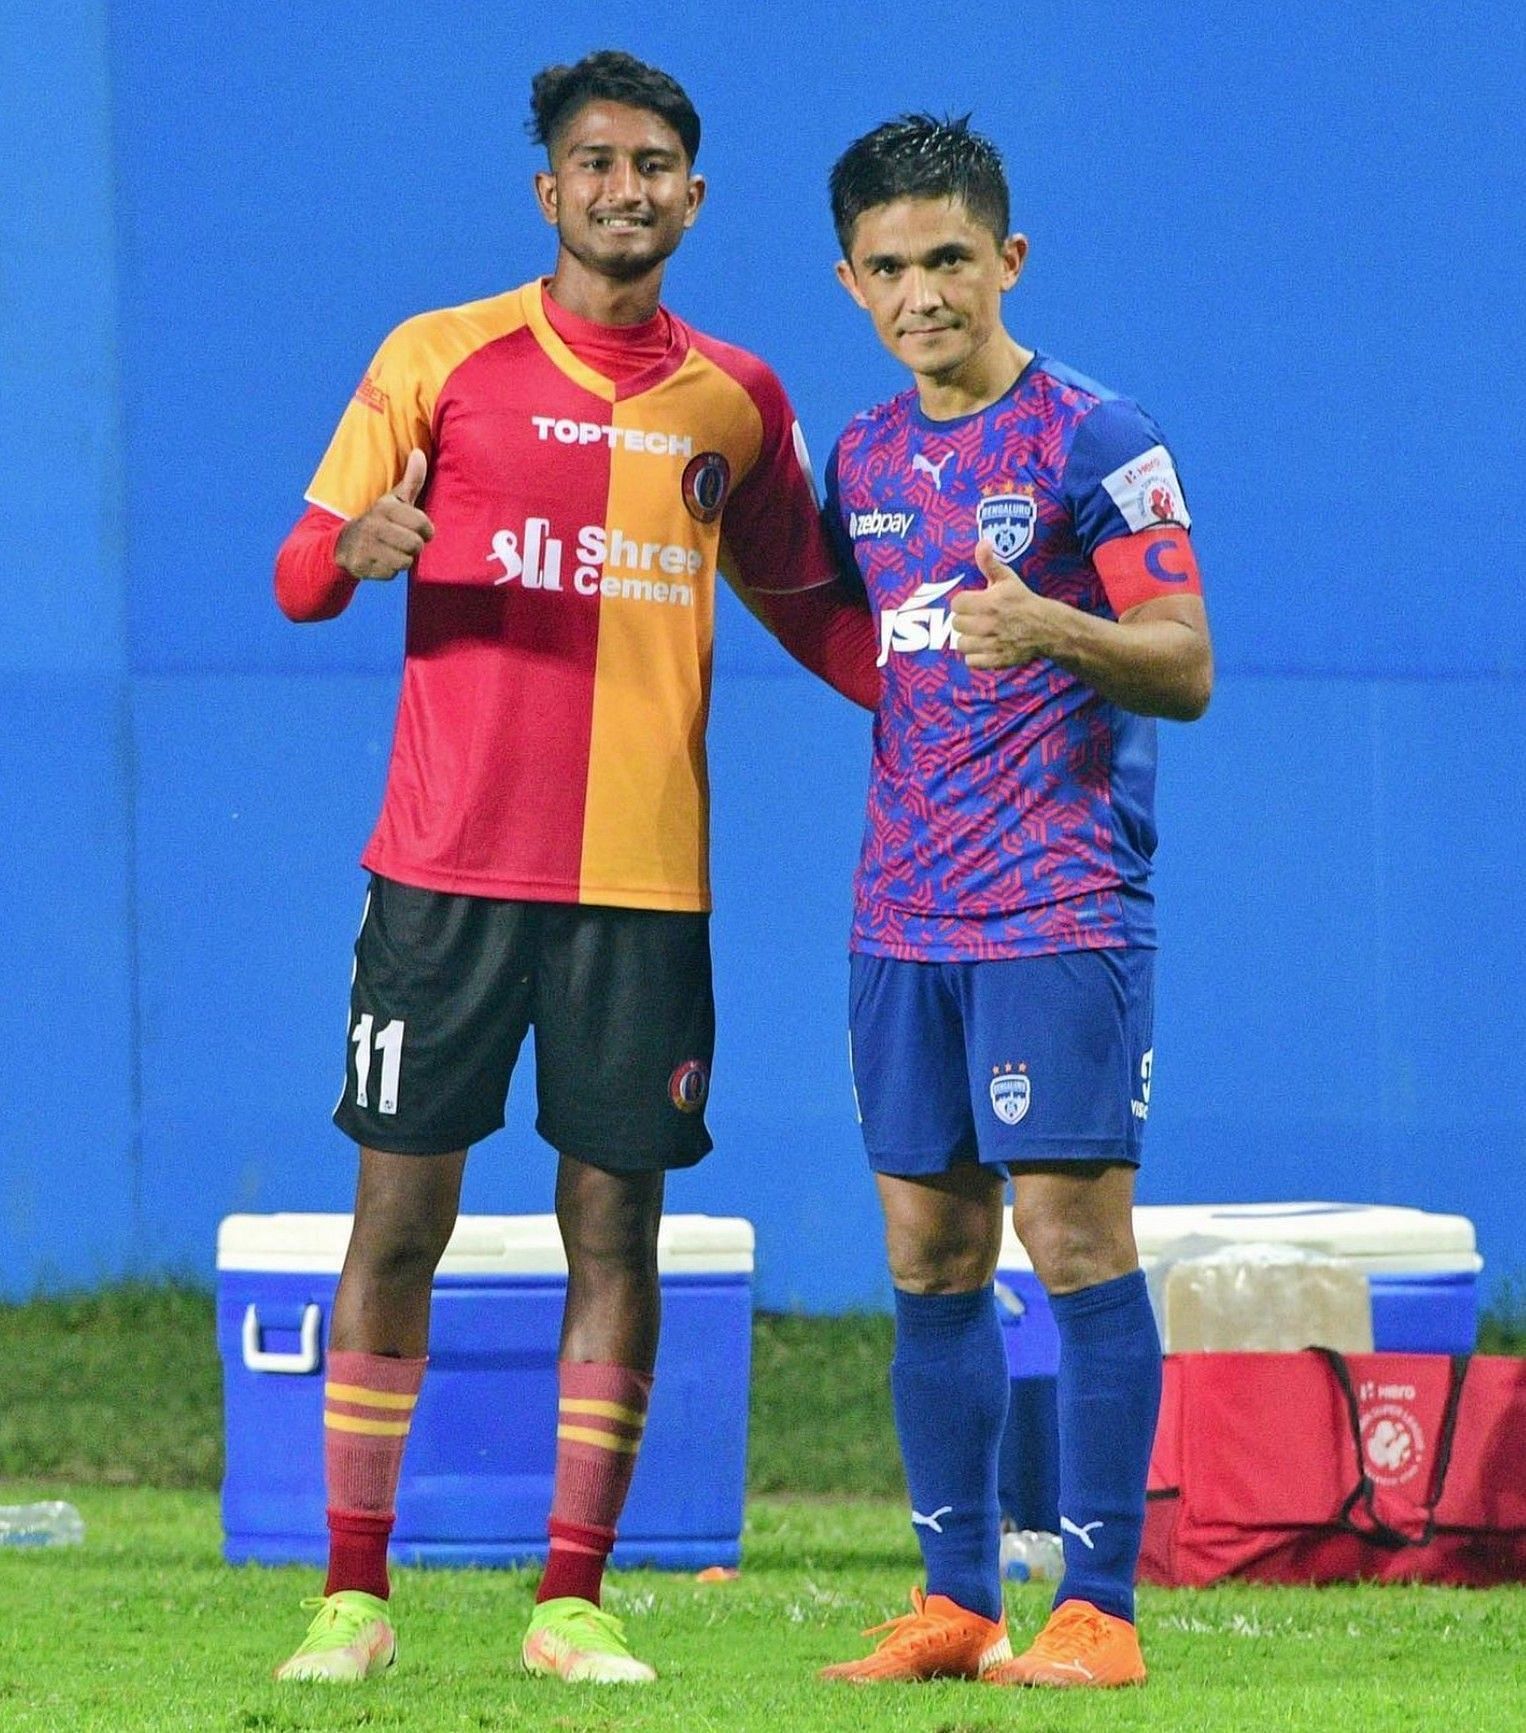 Master and apprentice: Subha Ghosh (left) with his idol Sunil Chhetri (right). Image: Subha Ghosh on Facebook